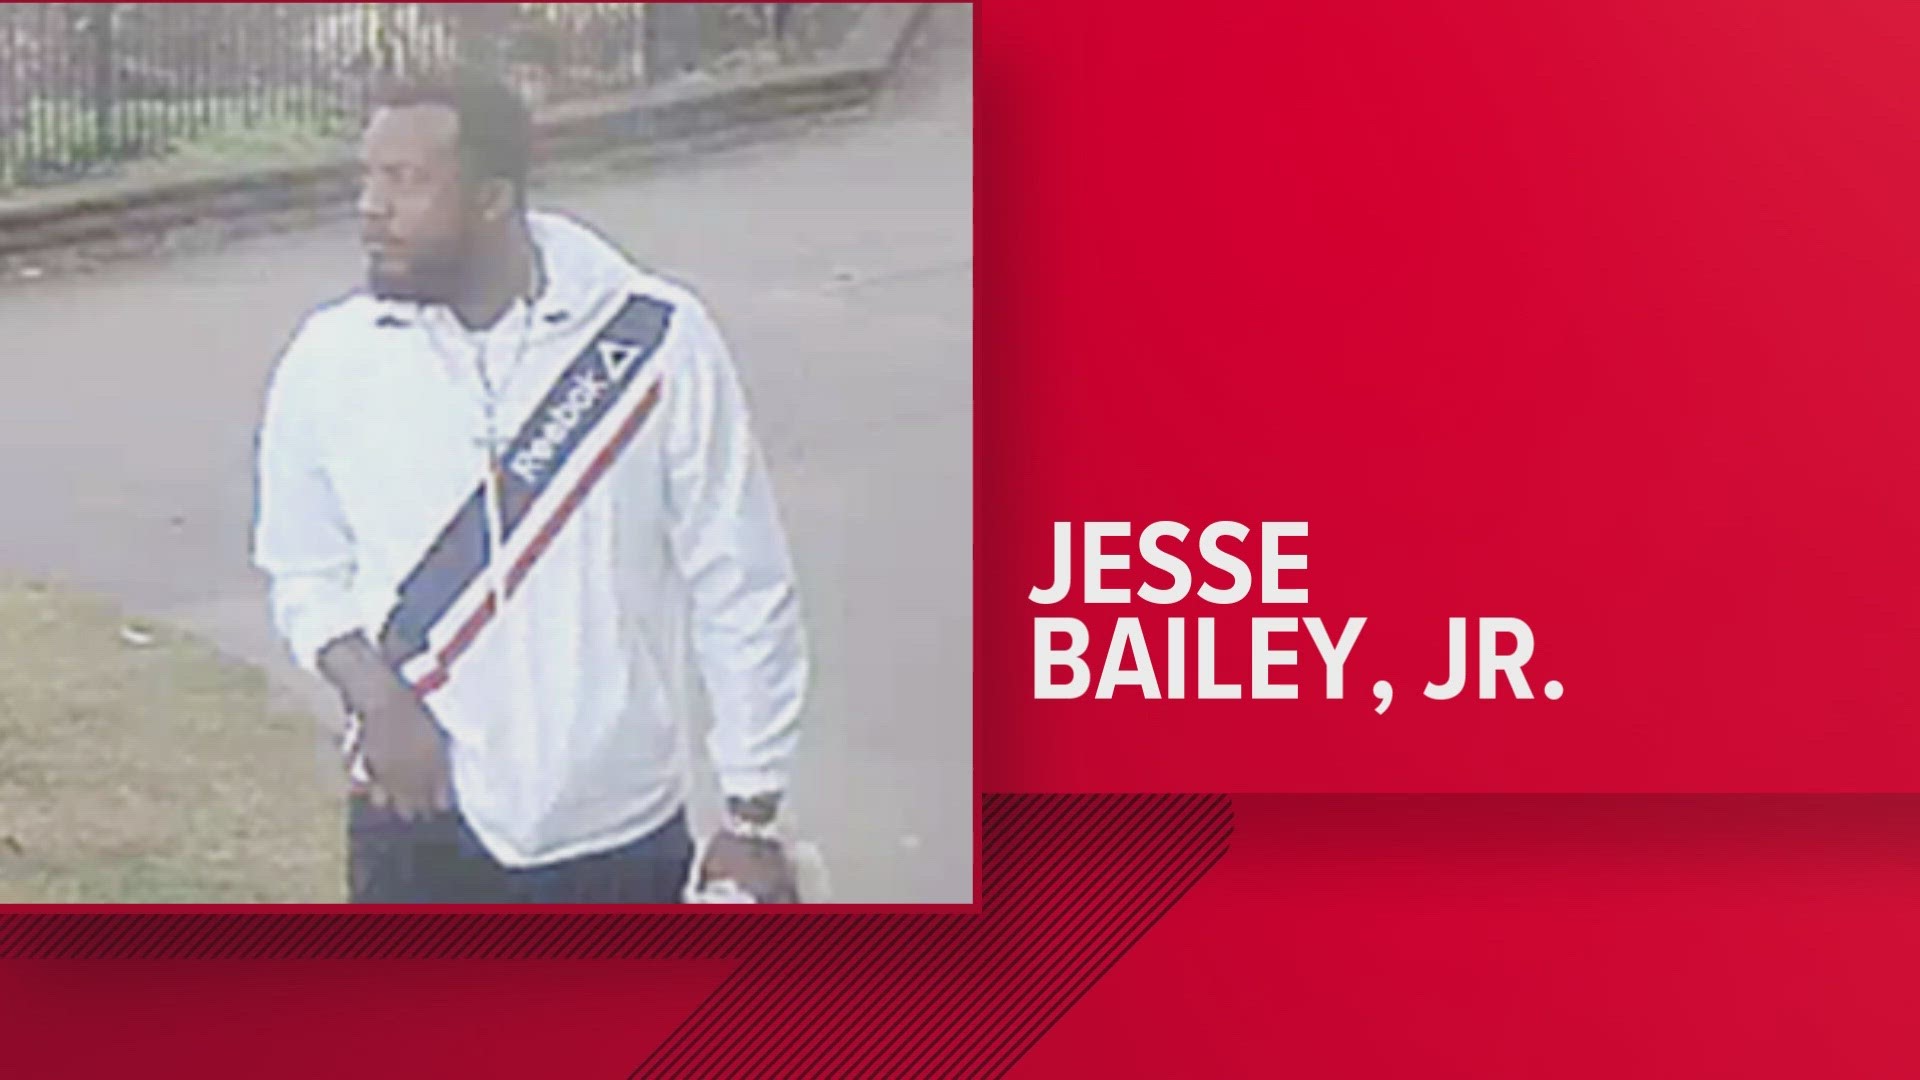 Jesse Bailey Jr. was wanted for first-degree murder and two other counts of attempted first-degree murder, according to the Knoxville Police